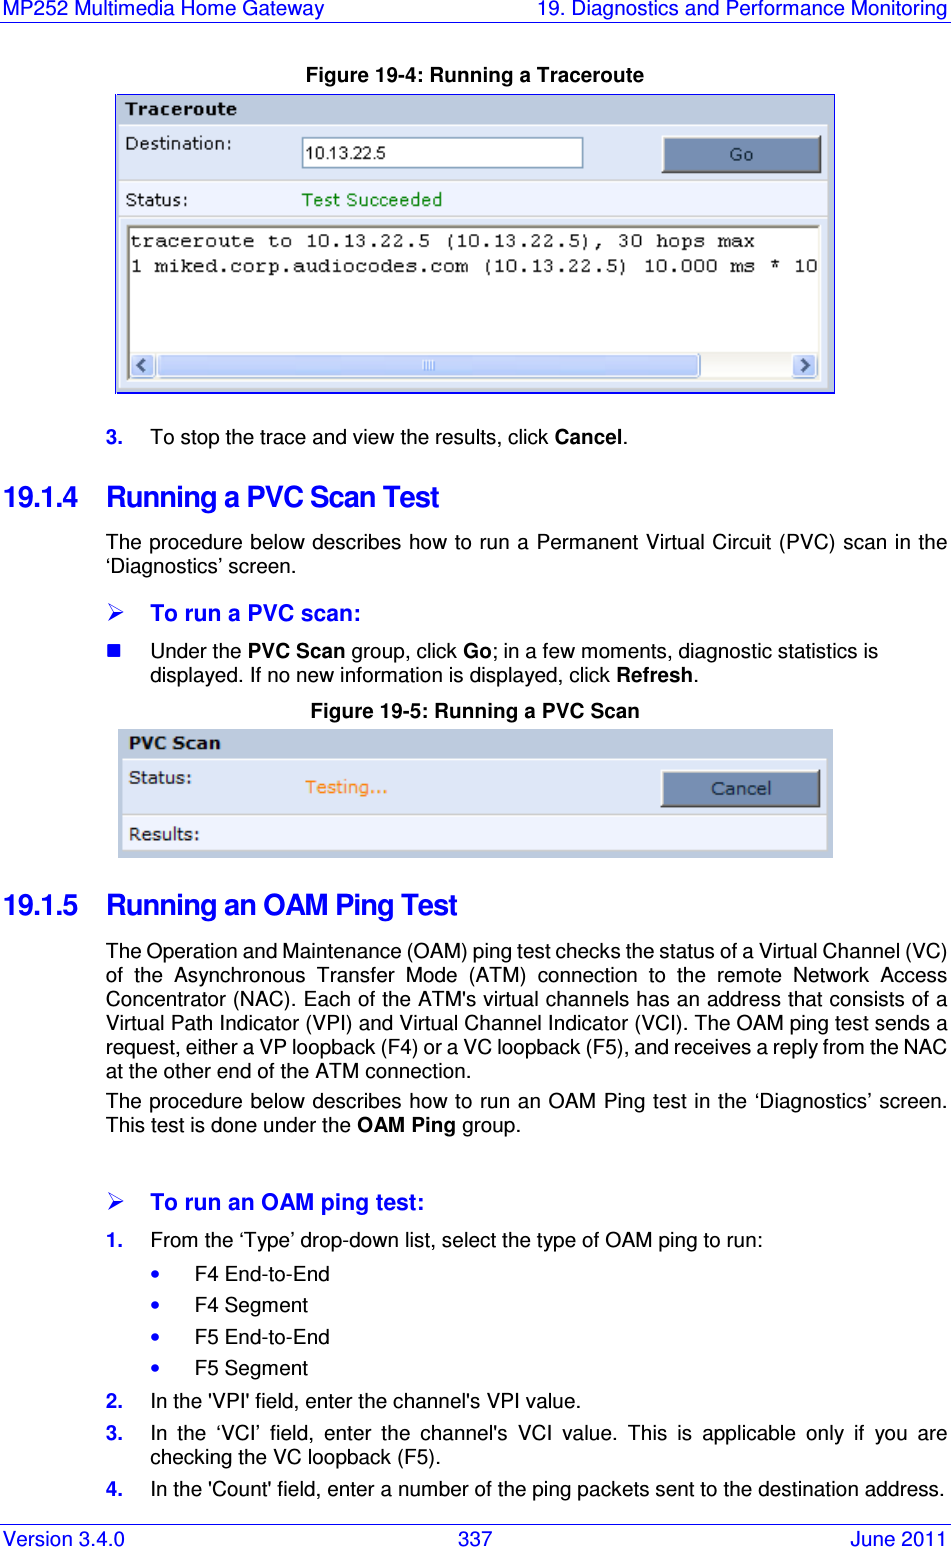 MP252 Multimedia Home Gateway  19. Diagnostics and Performance Monitoring Version 3.4.0  337  June 2011 Figure 19-4: Running a Traceroute  3.  To stop the trace and view the results, click Cancel. 19.1.4  Running a PVC Scan Test The procedure below describes how to run a Permanent Virtual Circuit (PVC) scan in the ‘Diagnostics’ screen.  To run a PVC scan:  Under the PVC Scan group, click Go; in a few moments, diagnostic statistics is displayed. If no new information is displayed, click Refresh. Figure 19-5: Running a PVC Scan  19.1.5  Running an OAM Ping Test The Operation and Maintenance (OAM) ping test checks the status of a Virtual Channel (VC) of  the  Asynchronous  Transfer  Mode  (ATM)  connection  to  the  remote  Network  Access Concentrator (NAC). Each of the ATM&apos;s virtual channels has an address that consists of a Virtual Path Indicator (VPI) and Virtual Channel Indicator (VCI). The OAM ping test sends a request, either a VP loopback (F4) or a VC loopback (F5), and receives a reply from the NAC at the other end of the ATM connection. The procedure below describes how to run an OAM Ping test in the ‘Diagnostics’ screen. This test is done under the OAM Ping group.   To run an OAM ping test: 1.  From the ‘Type’ drop-down list, select the type of OAM ping to run: • F4 End-to-End • F4 Segment • F5 End-to-End • F5 Segment 2.  In the &apos;VPI&apos; field, enter the channel&apos;s VPI value. 3.  In  the  ‘VCI’  field,  enter  the  channel&apos;s  VCI  value.  This  is  applicable  only  if  you  are checking the VC loopback (F5).  4.  In the &apos;Count&apos; field, enter a number of the ping packets sent to the destination address. 